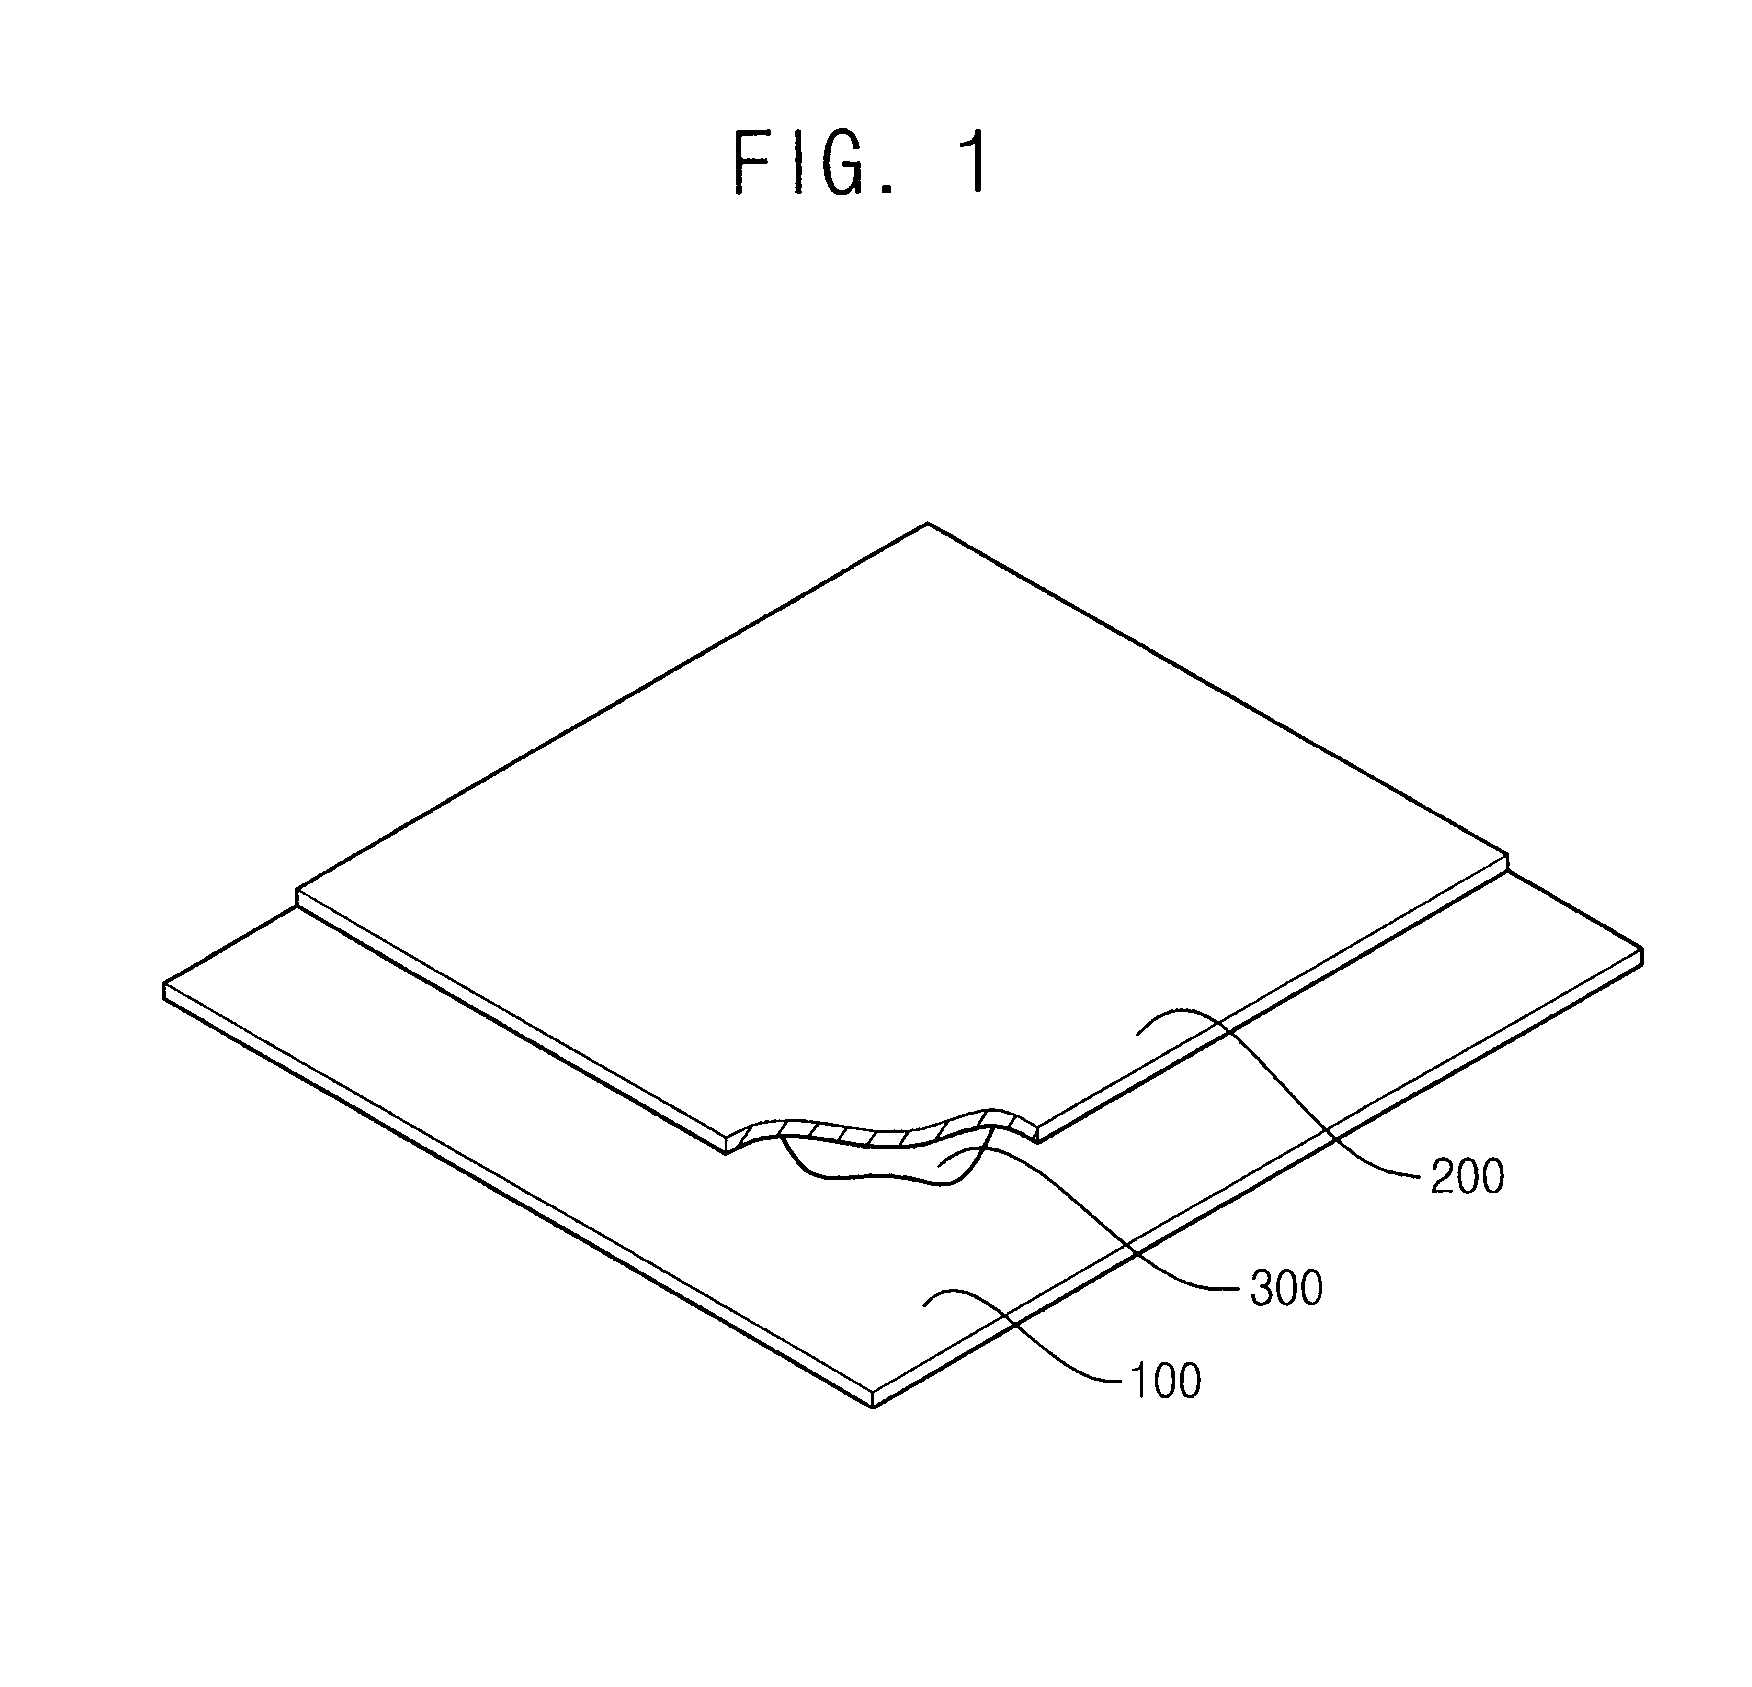 Display substrate, method of manufacturing the display substrate and display apparatus having the display substrate